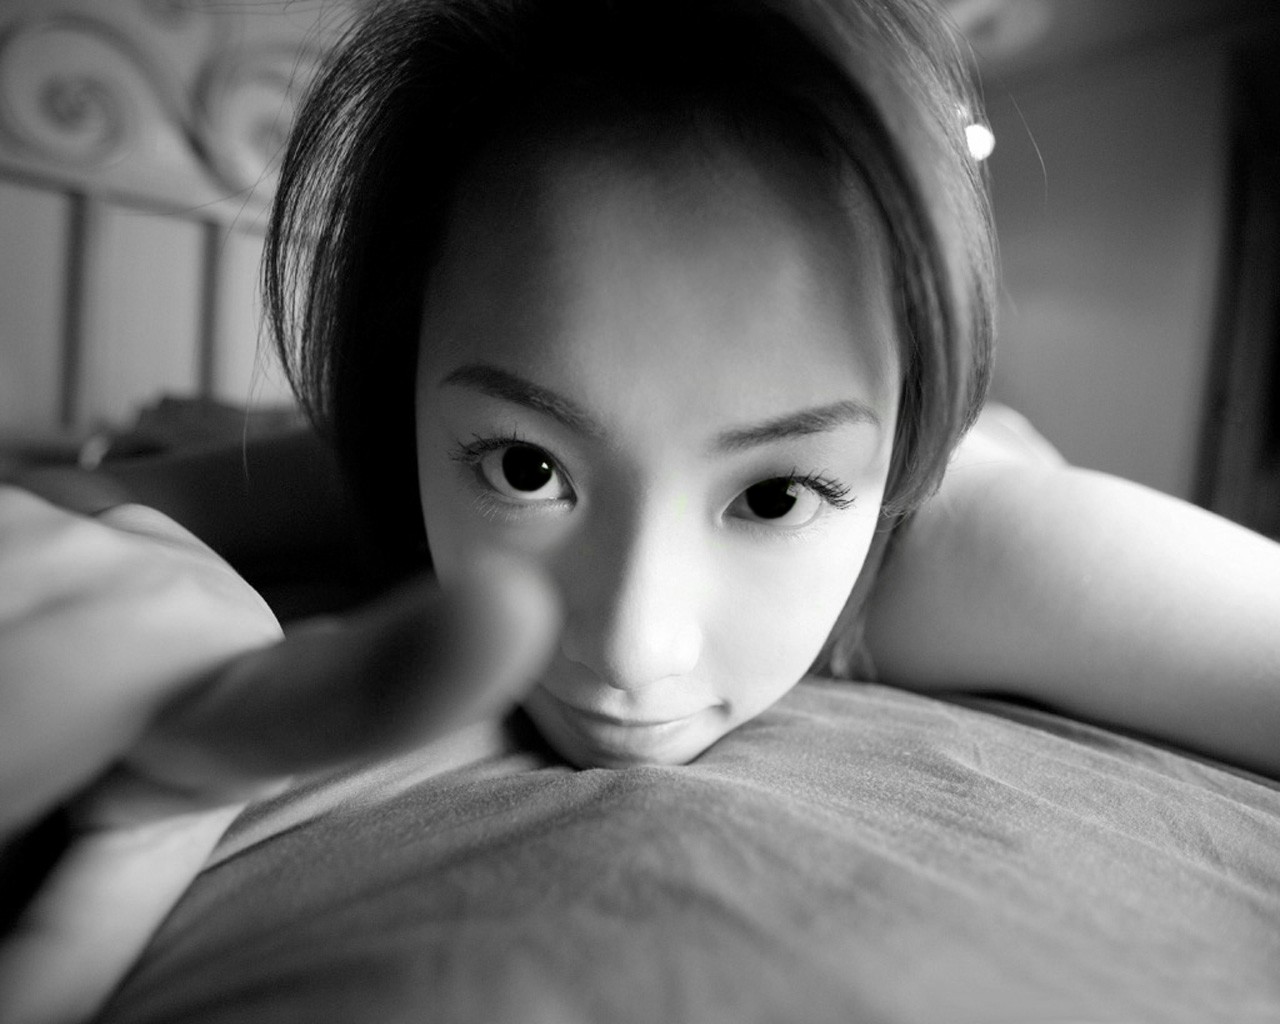 People 1280x1024 Asian monochrome face women model women indoors in bed bed looking at viewer fingers